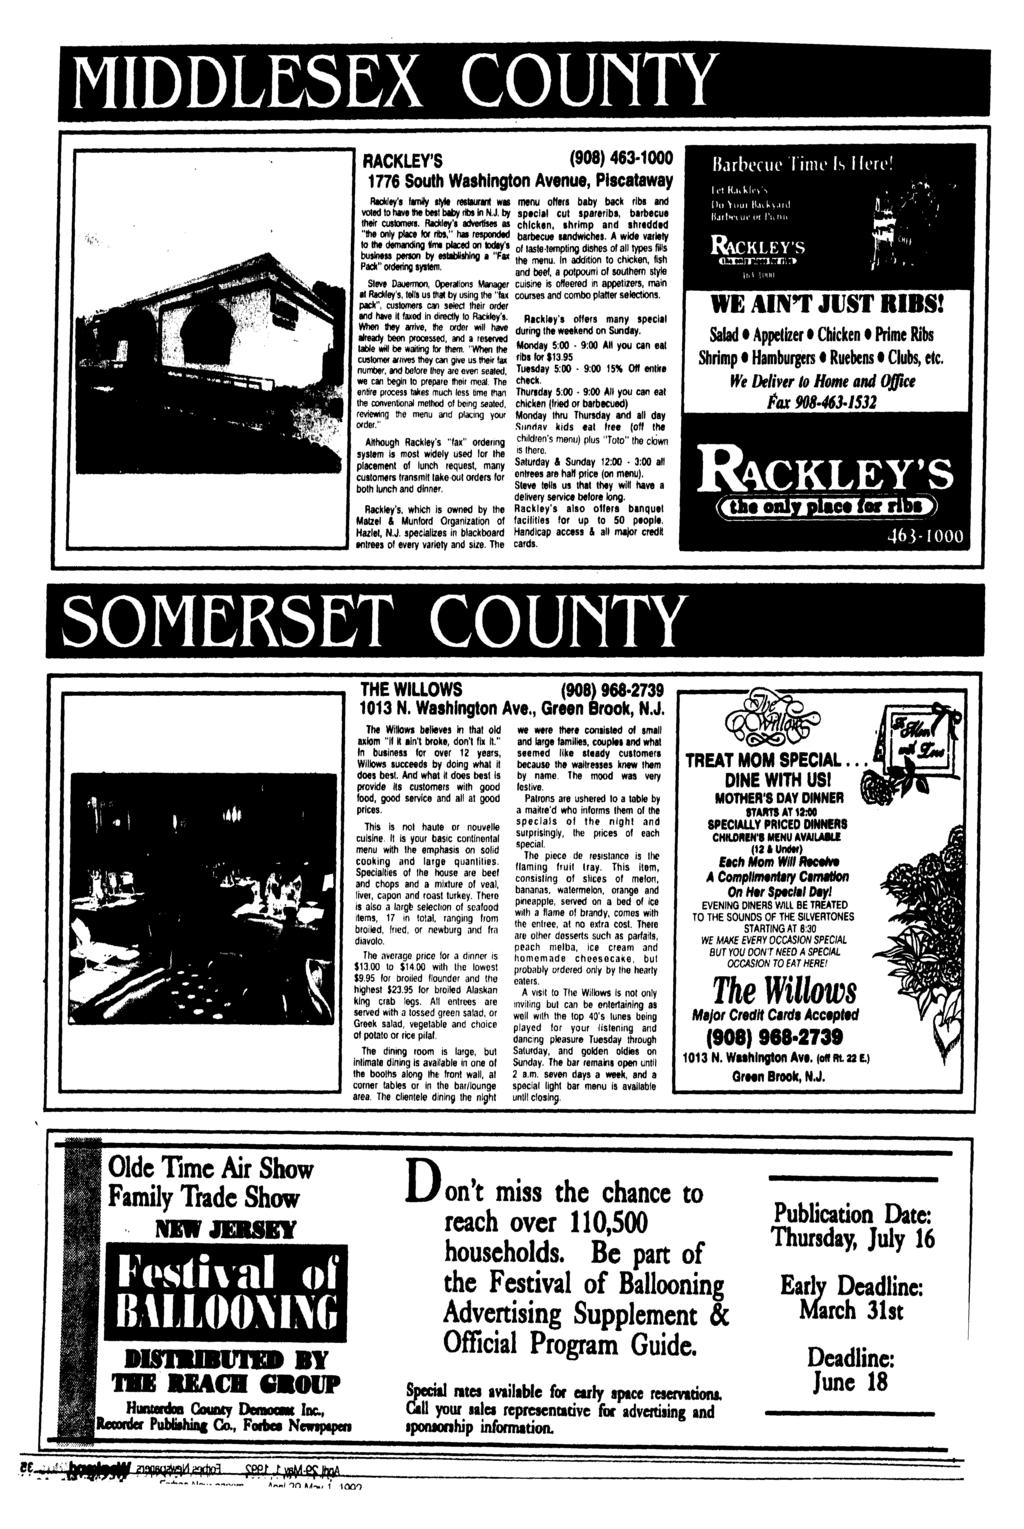 MIDDLESEX COUFiTY RACKLEY'S (908) 463-1000 1776 South Washington Avenue, Piscataway Hartley's lamhy style restaurant was voted to have the best baby ribs in N J by their customers.